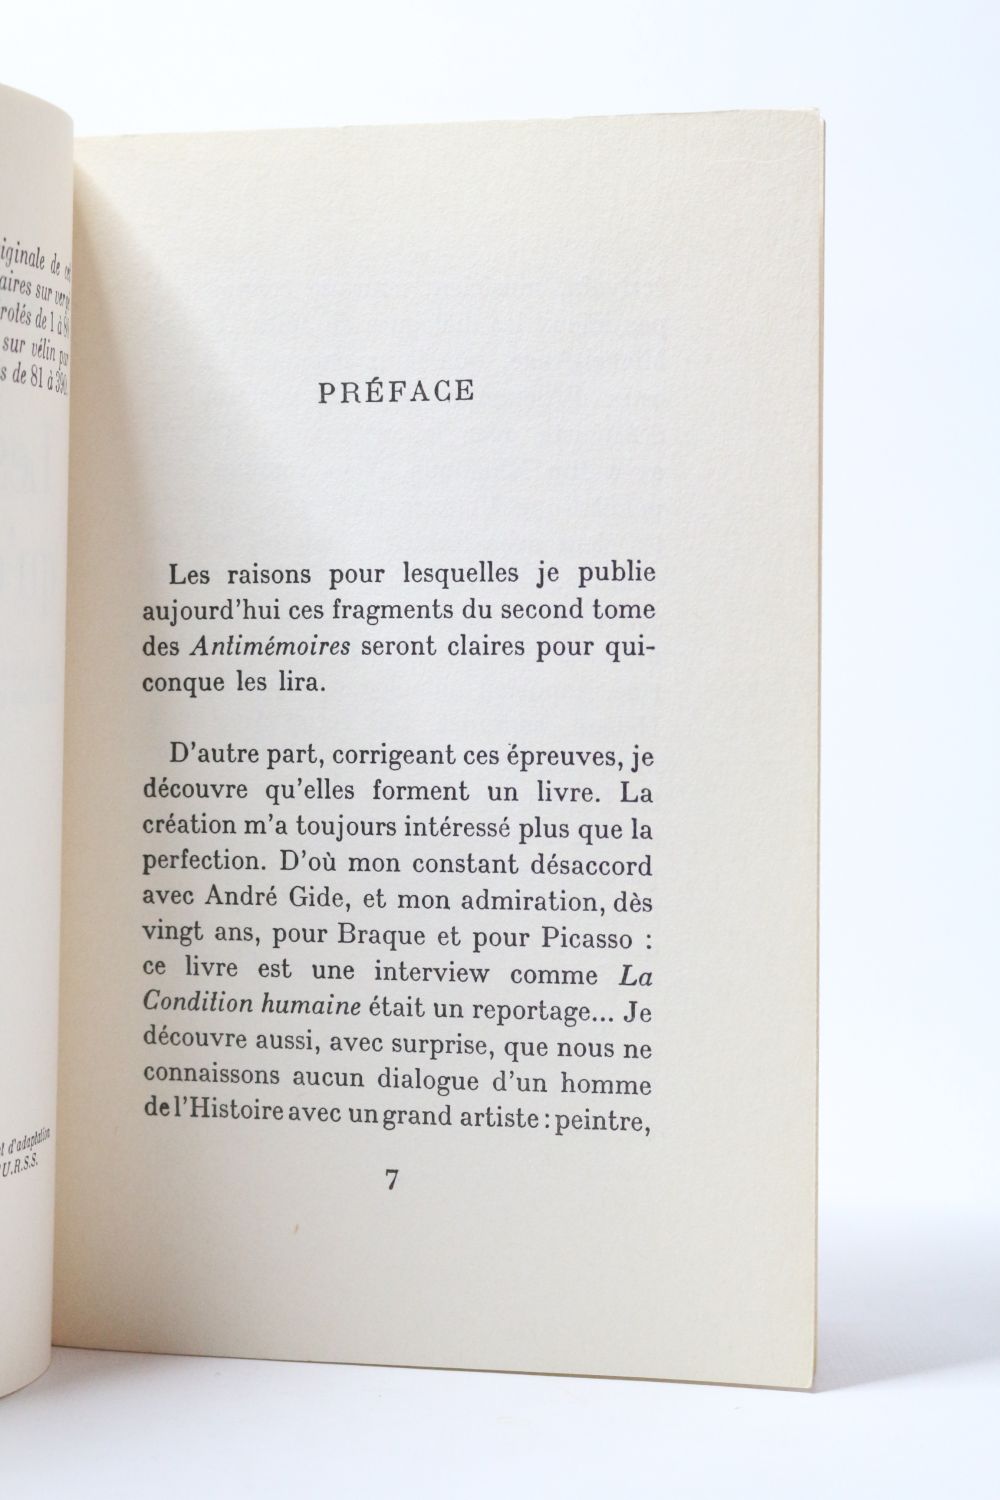 MALRAUX : Les chênes qu'on abat... - Signed book, First edition ...